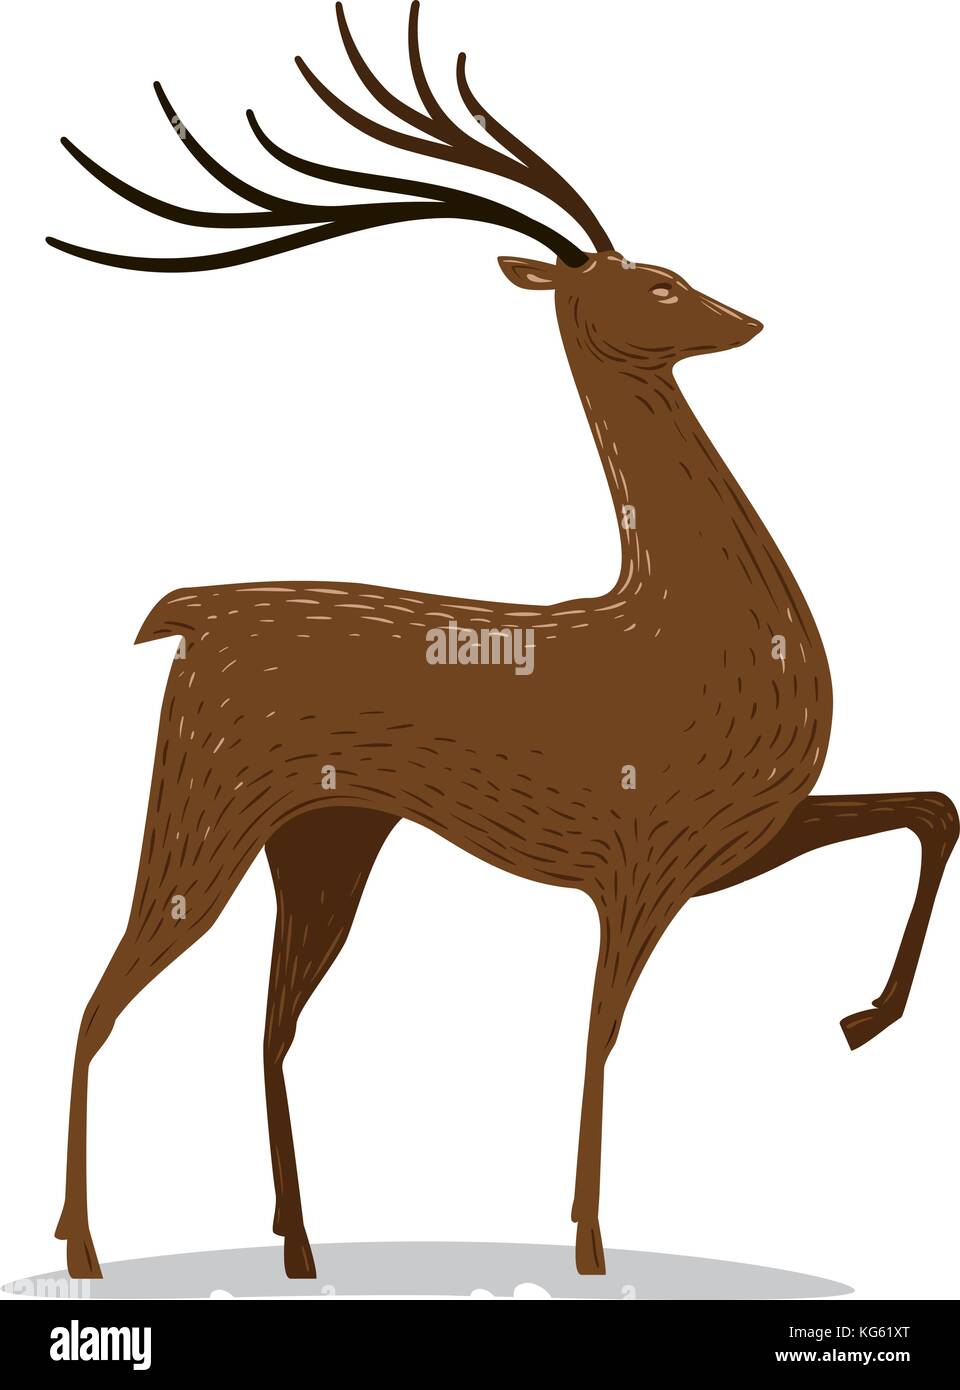 Deer with horns. Decorative animal. Vector illustration Stock Vector